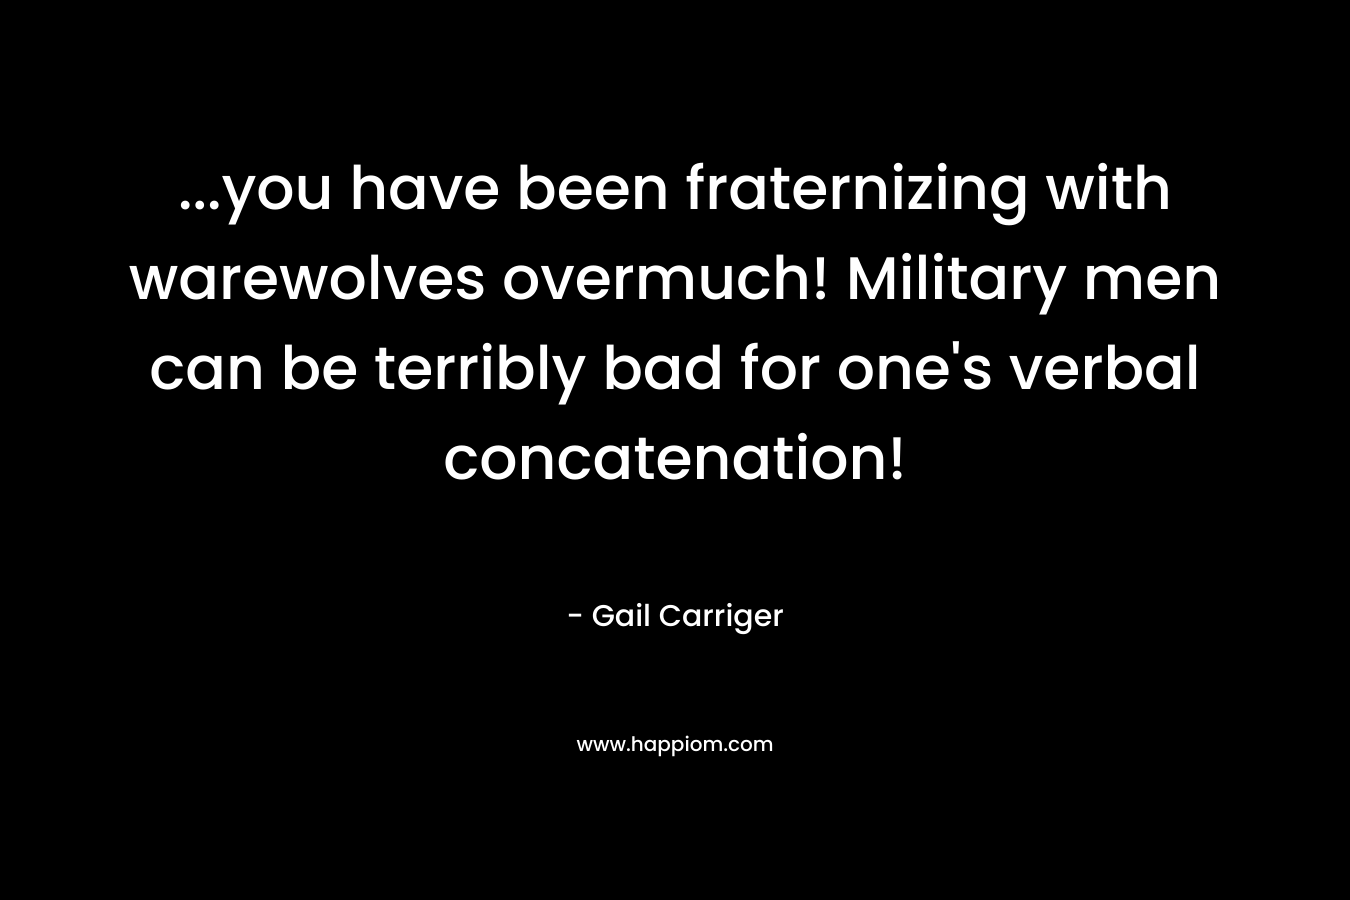 ...you have been fraternizing with warewolves overmuch! Military men can be terribly bad for one's verbal concatenation!